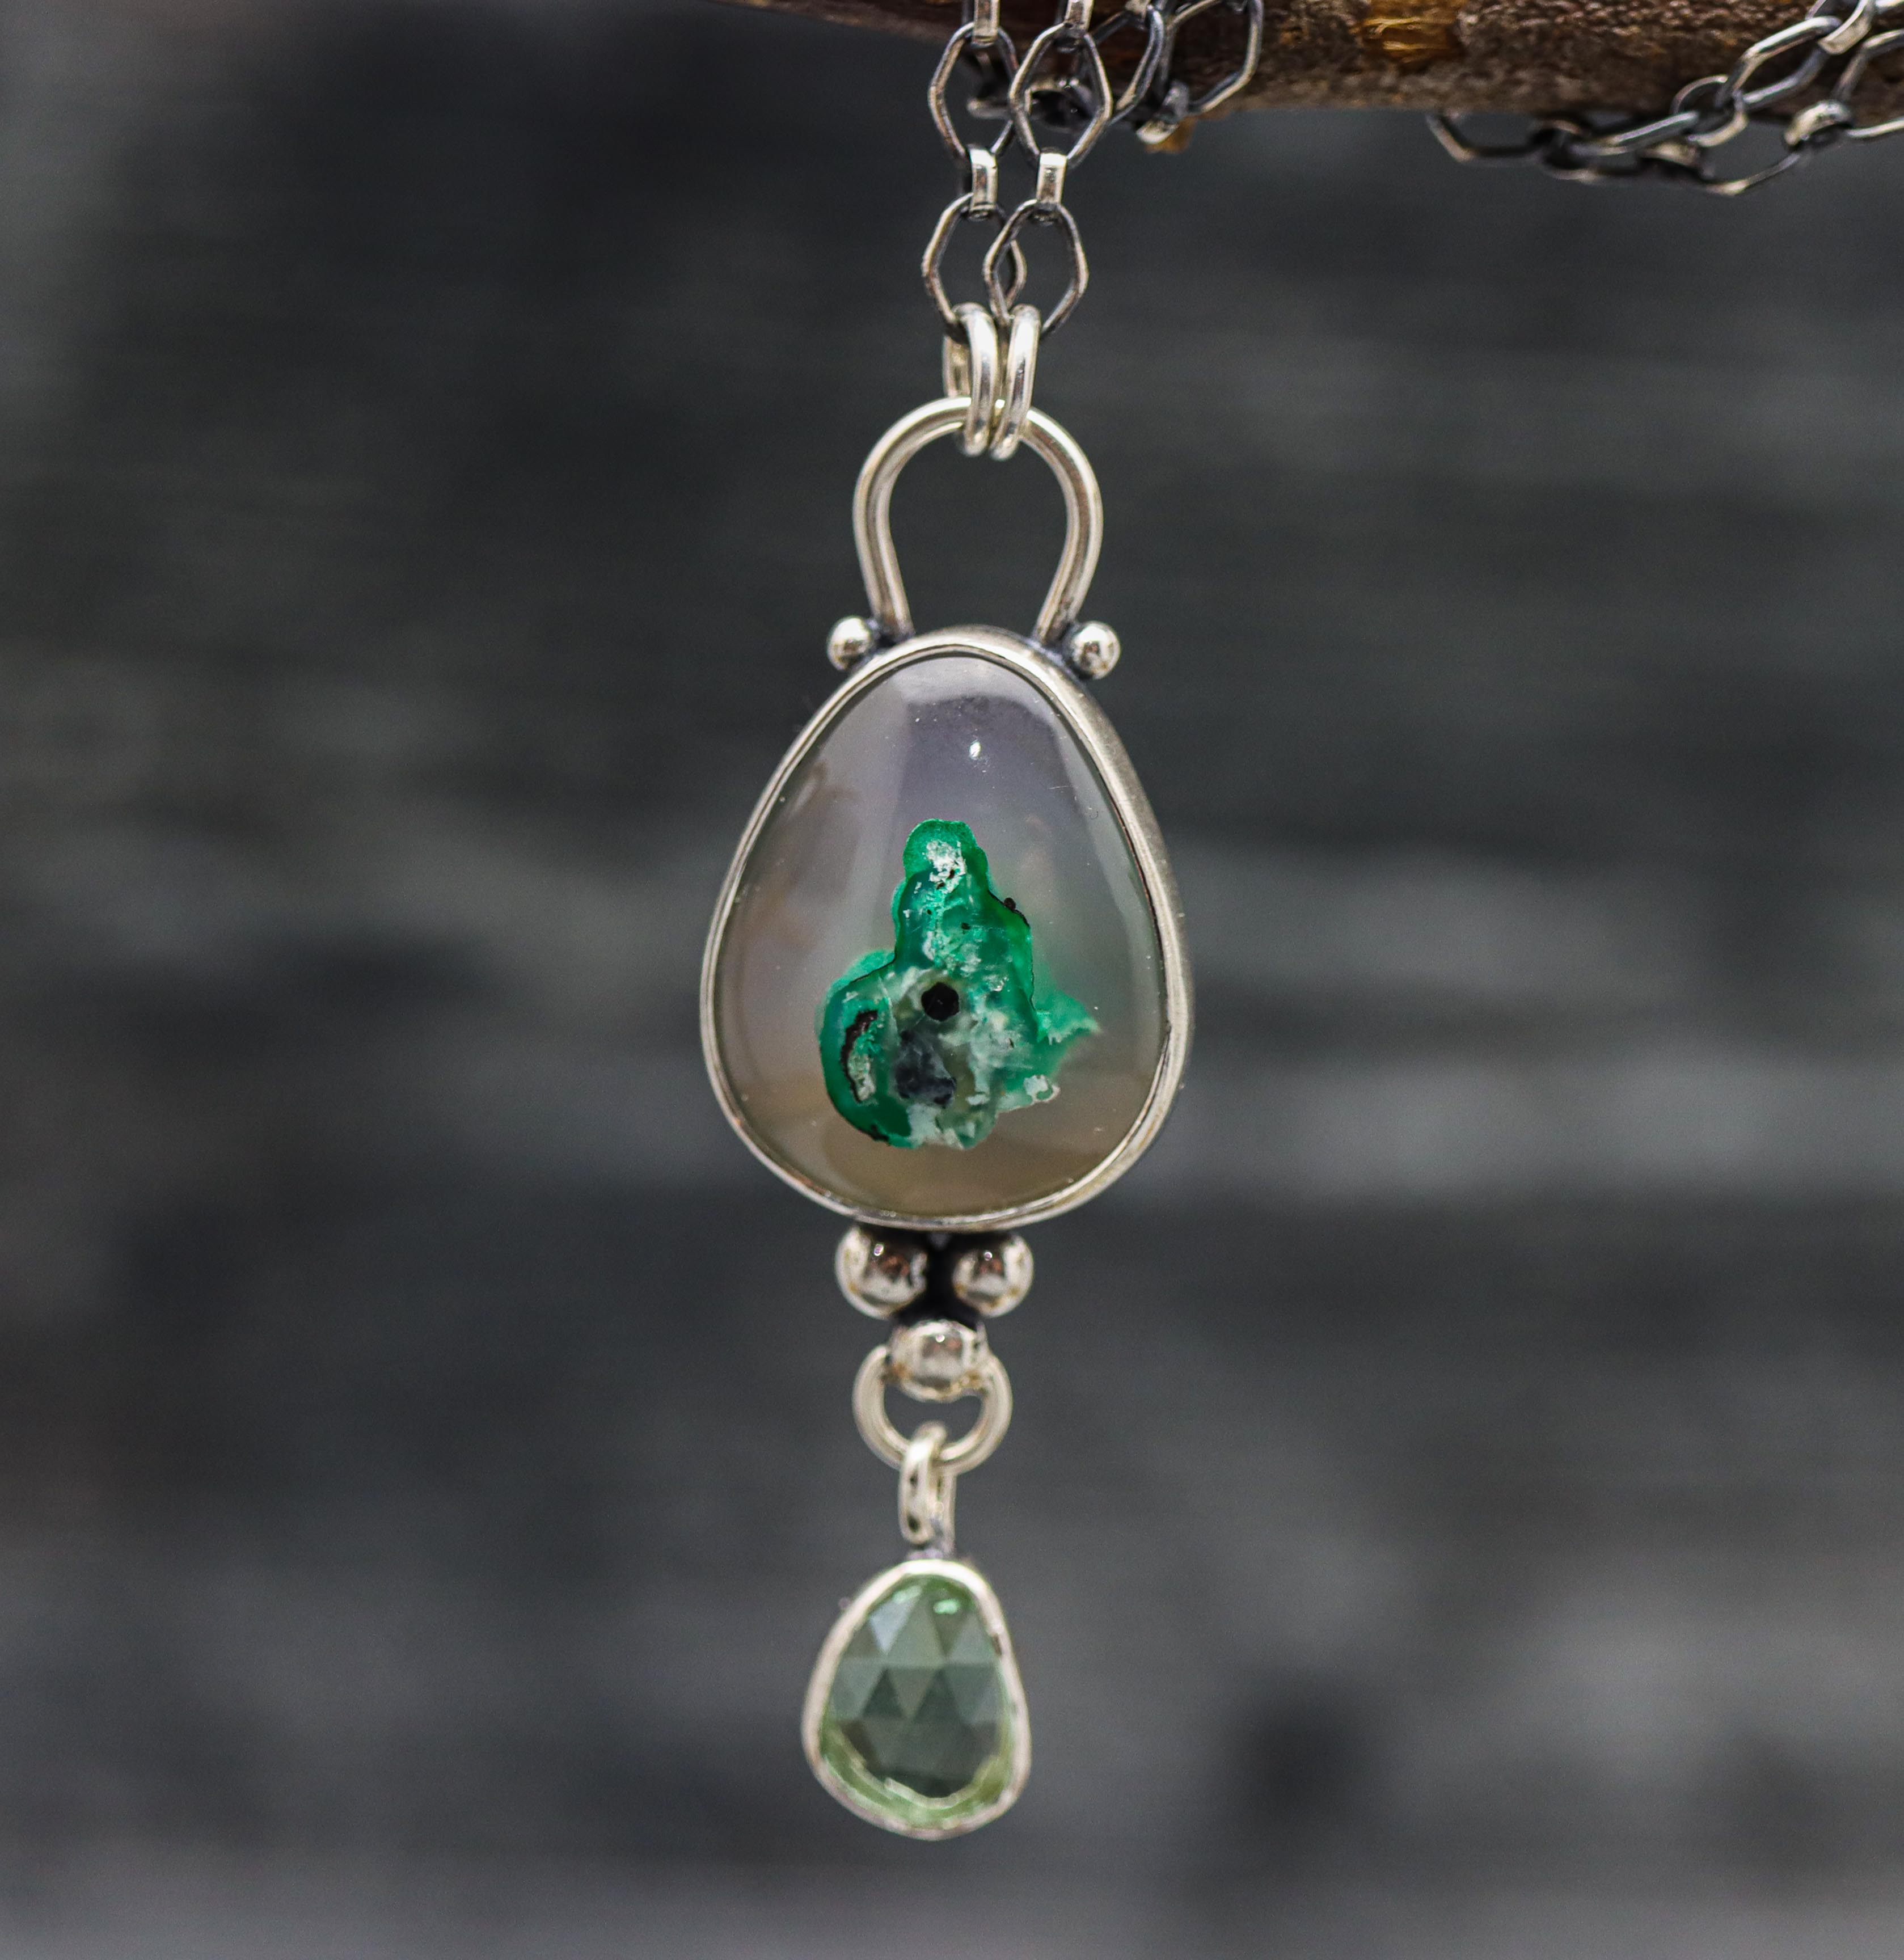 Confetti Chrysocolla Agate and Blue Tourmaline Pendant Sterling Silver One Of a Kind Gemstone Necklace